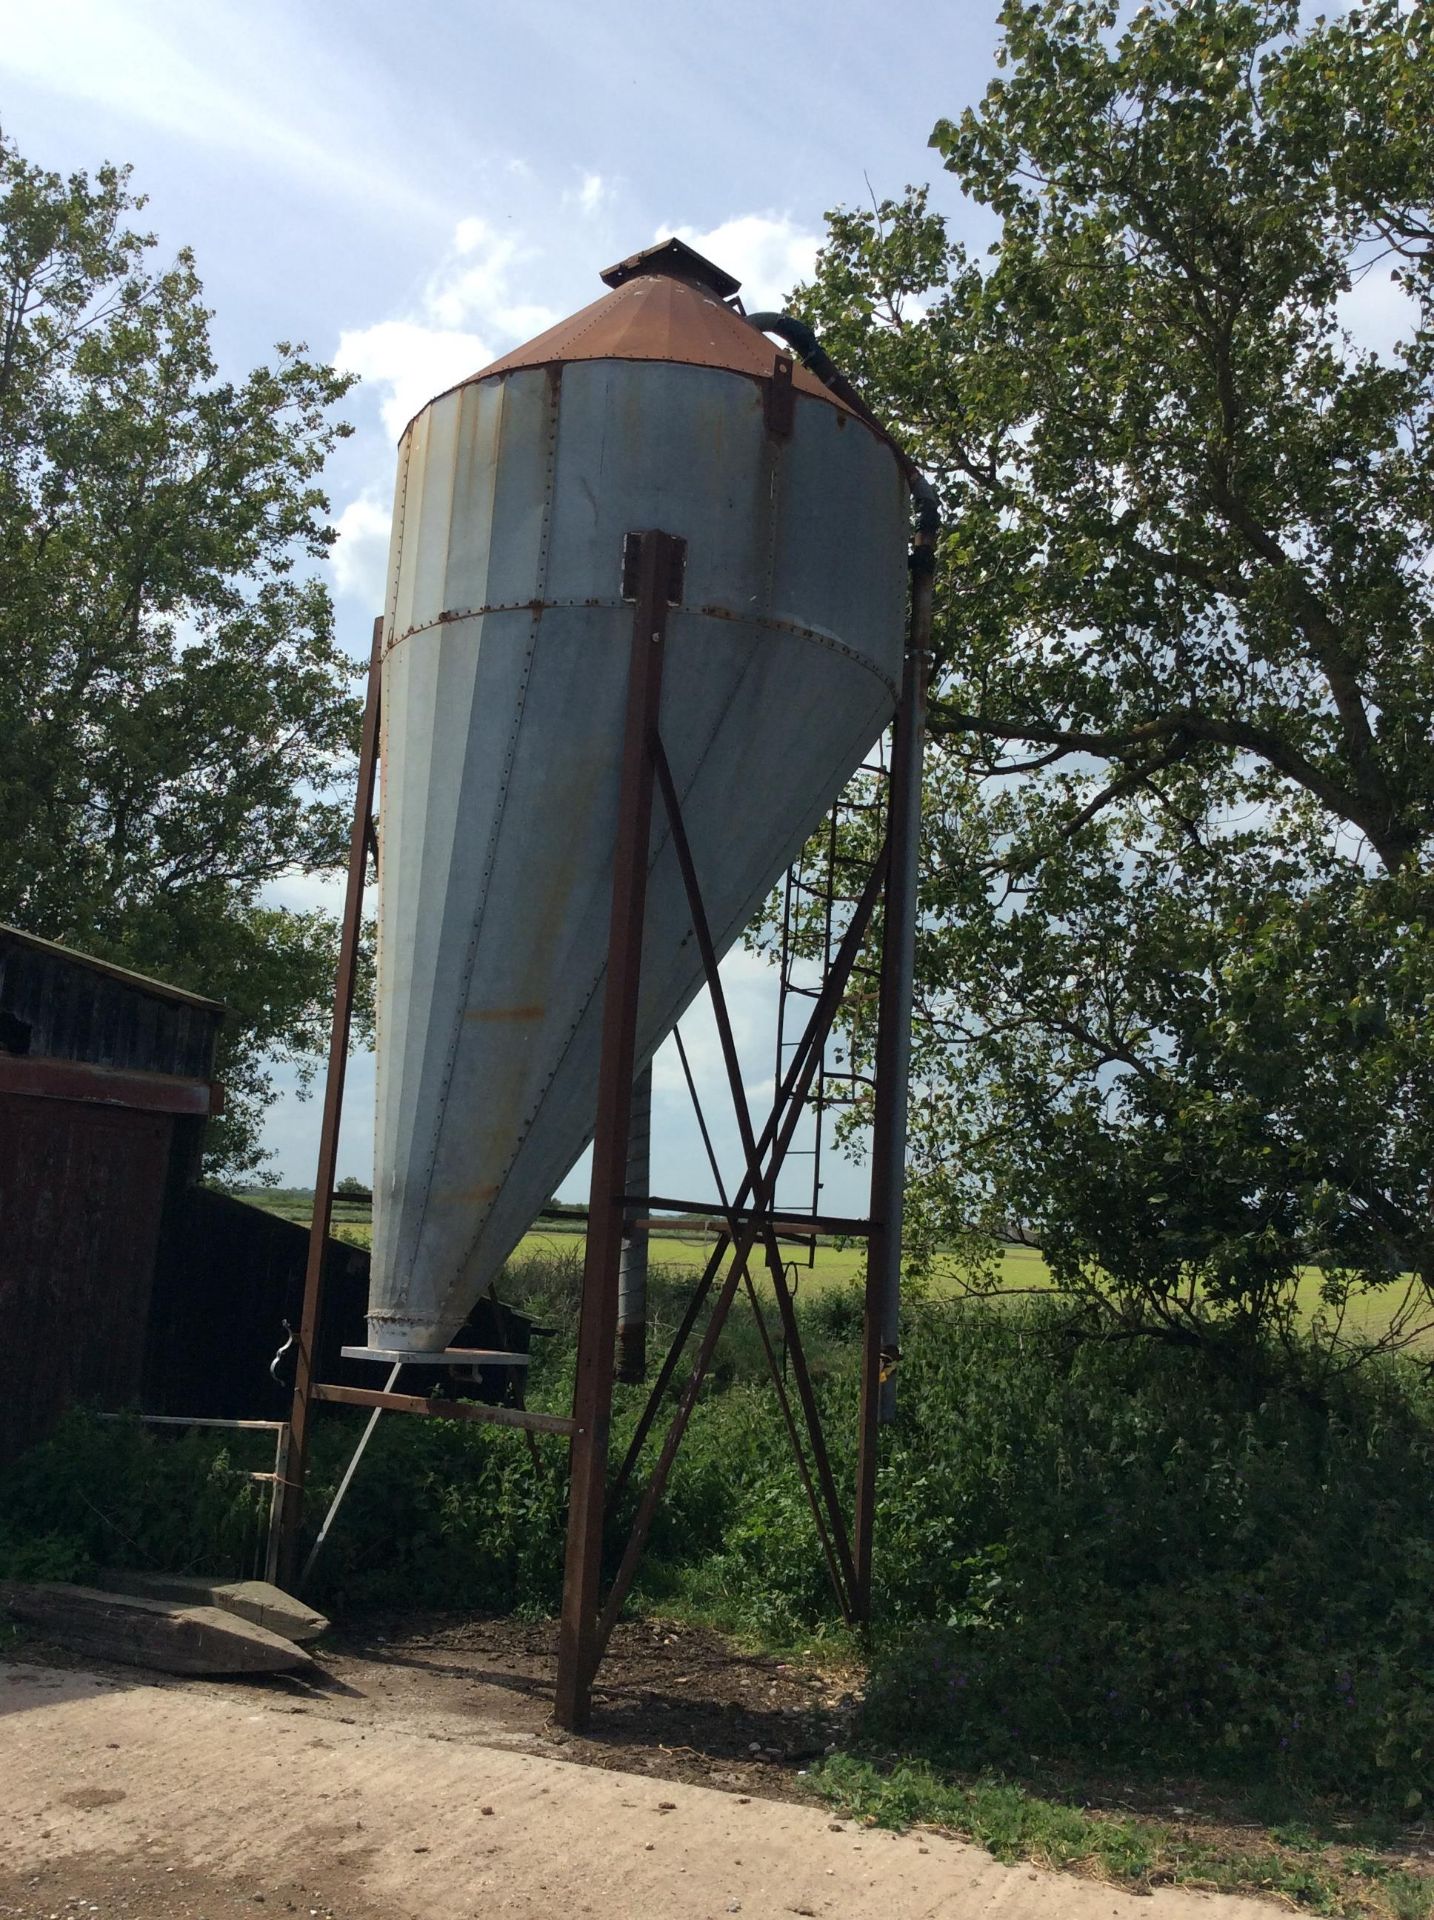 8 tonne food bin. It doesn't leak and has been used to store pig feed. Stored near Waxham.